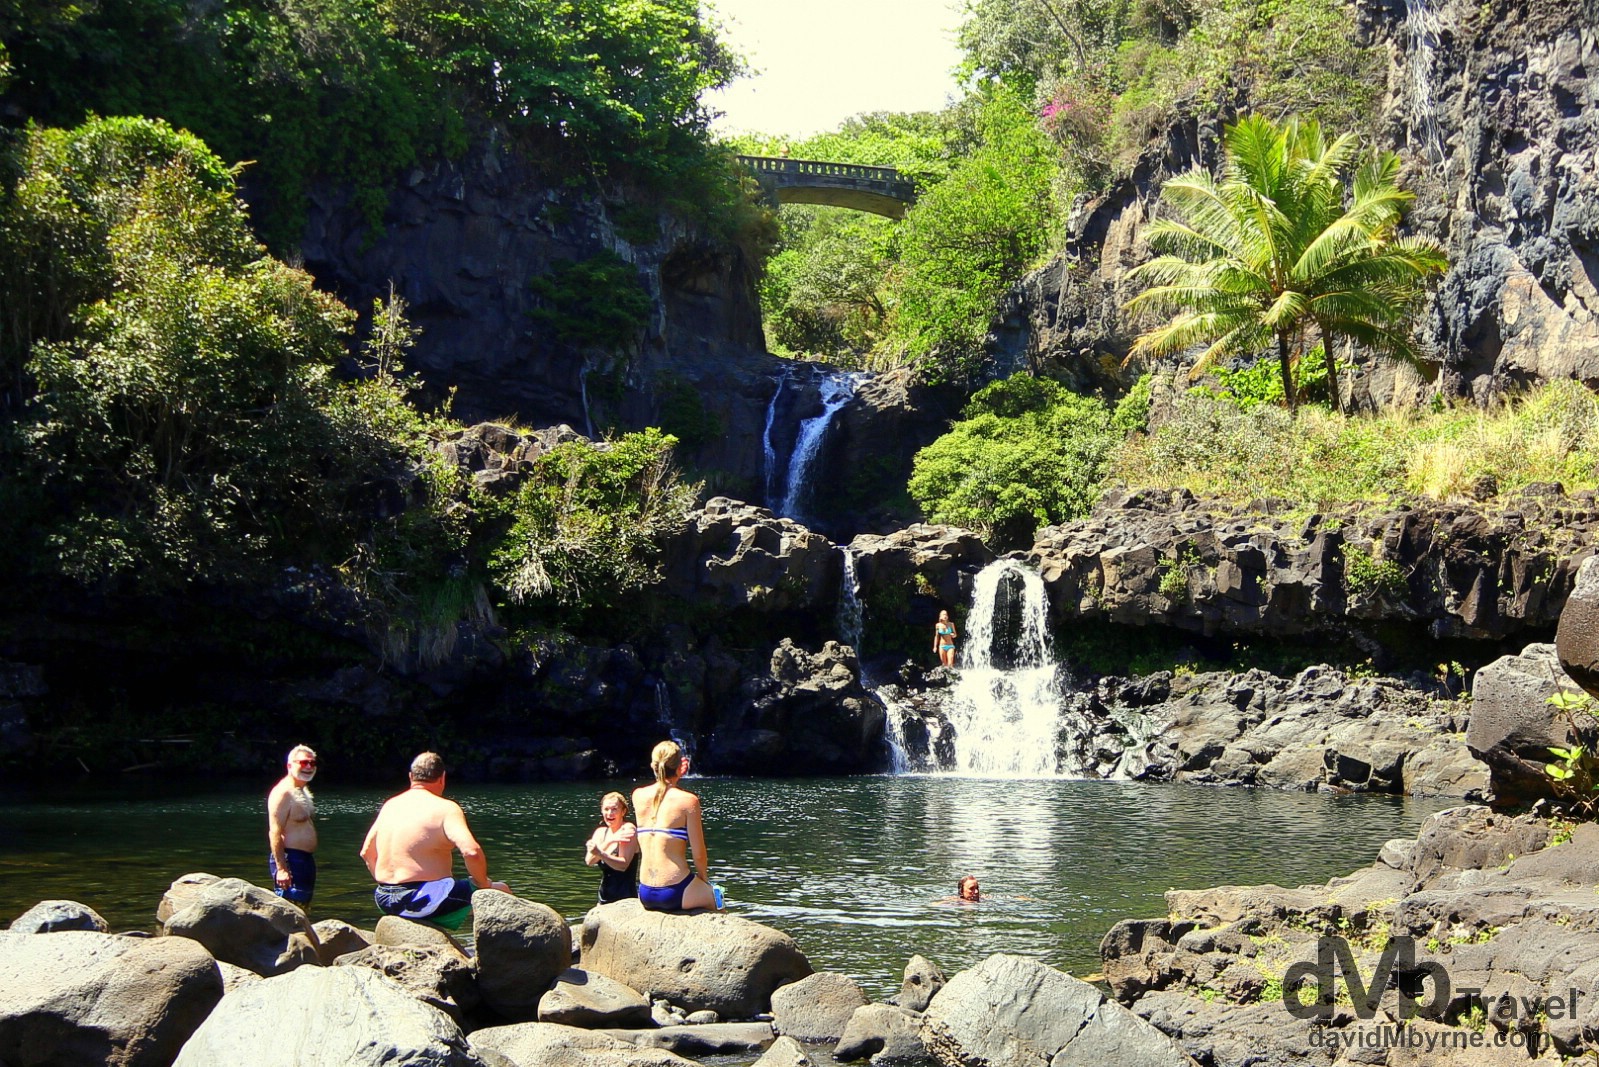 Swimming in the watering holes at Oheo Gulch in Haleakala National Park, near Kuloa Point, Maui, one of the more refreshing stops on Valley Isle Excursion's 'Road To Hana' tour. Maui, Hawaii, USA. March 7th 2103.